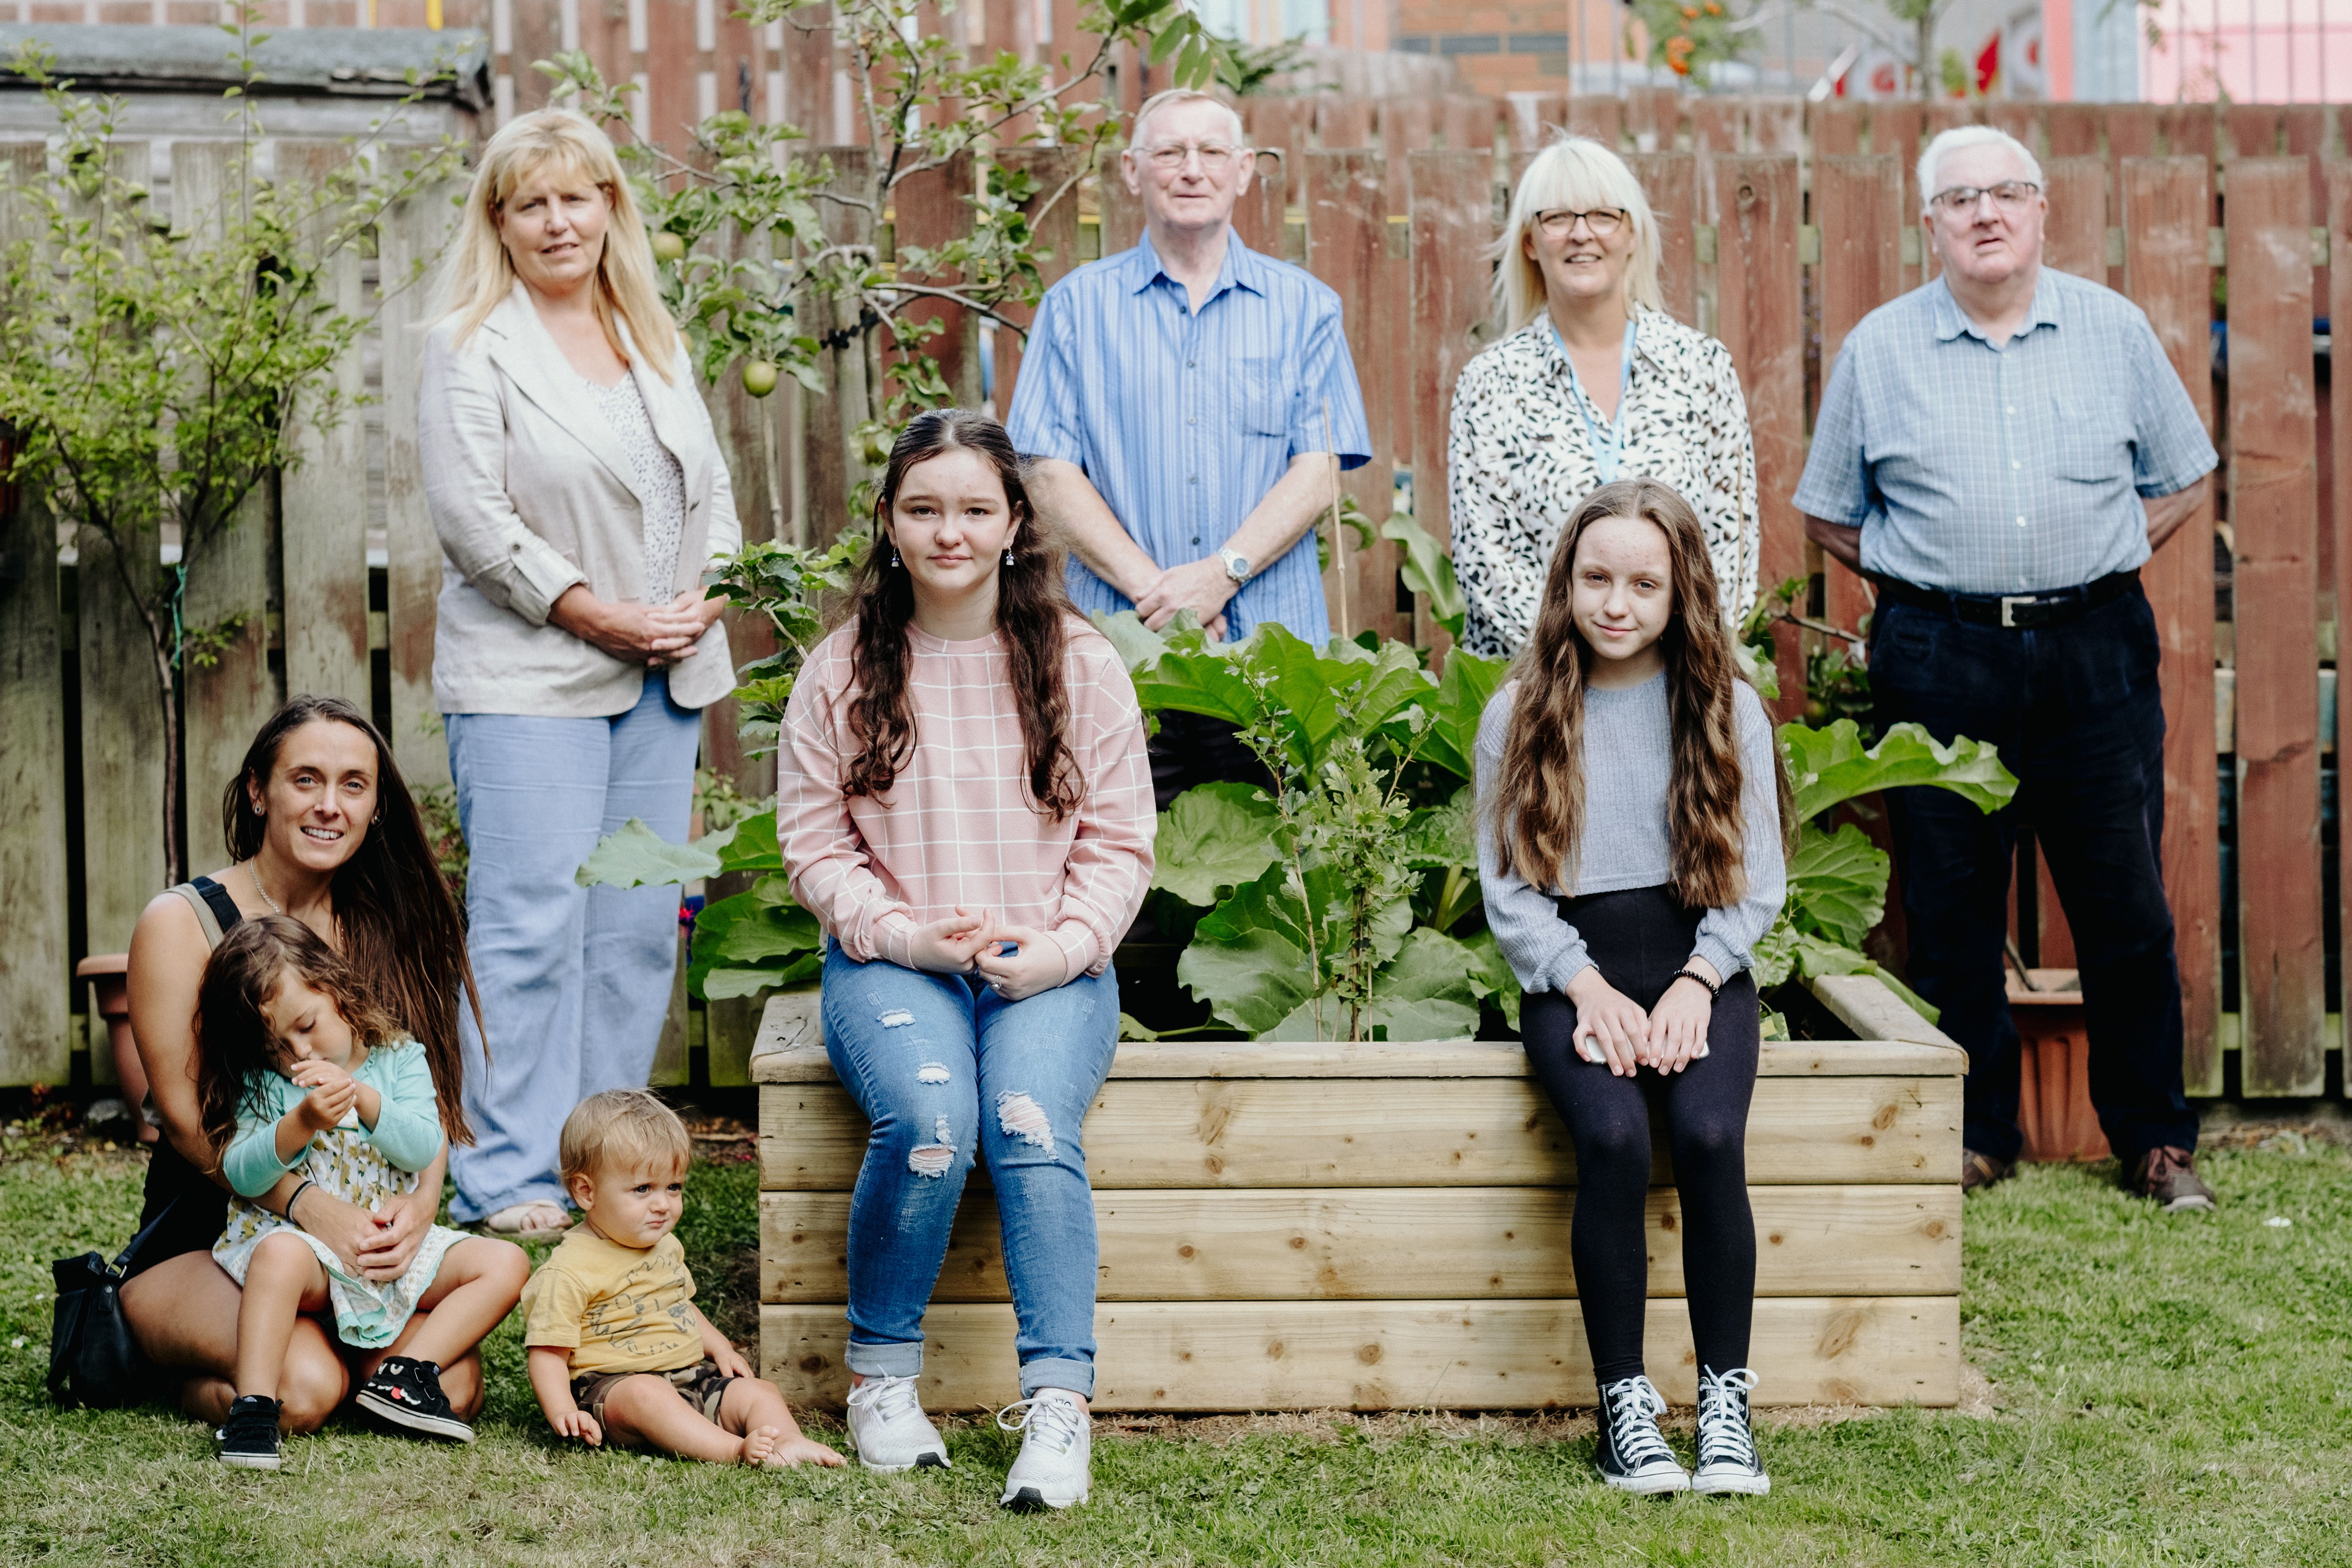 BIODIVERSITY PROJECT: Fiona Mc Auley (Radius), Chris Beattie (resident), Kathleen McIlroy (Coordinator), Patrick Hill (resident) and volunteers from Divis Community Project at Cullingtree Fold on the Falls Road